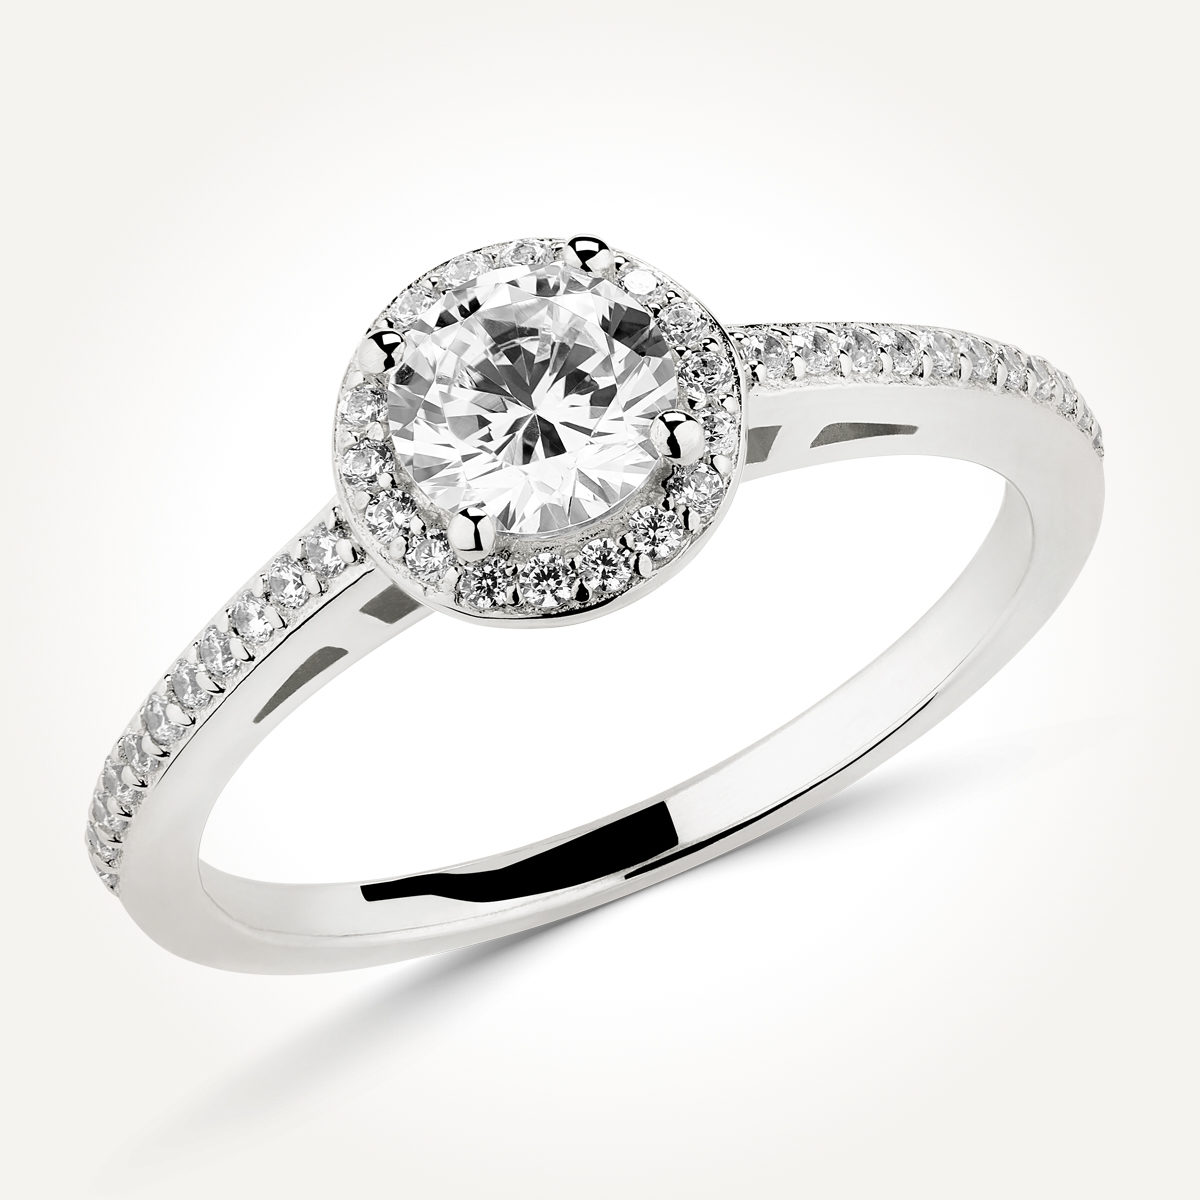 Halo Engagement Ring - 7513 A